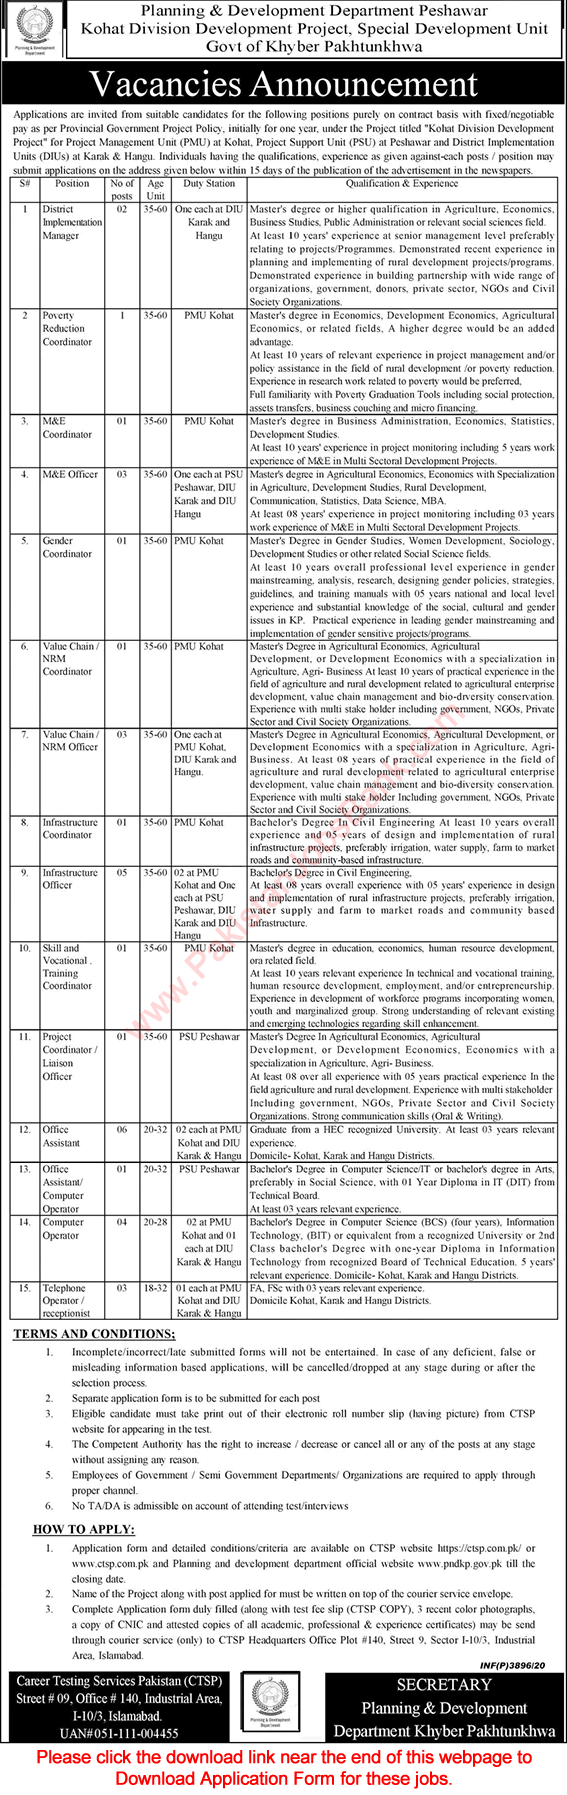 Planning and Development Department KPK Jobs 2020 October CTSP Application Form Office Assistant & Others Latest